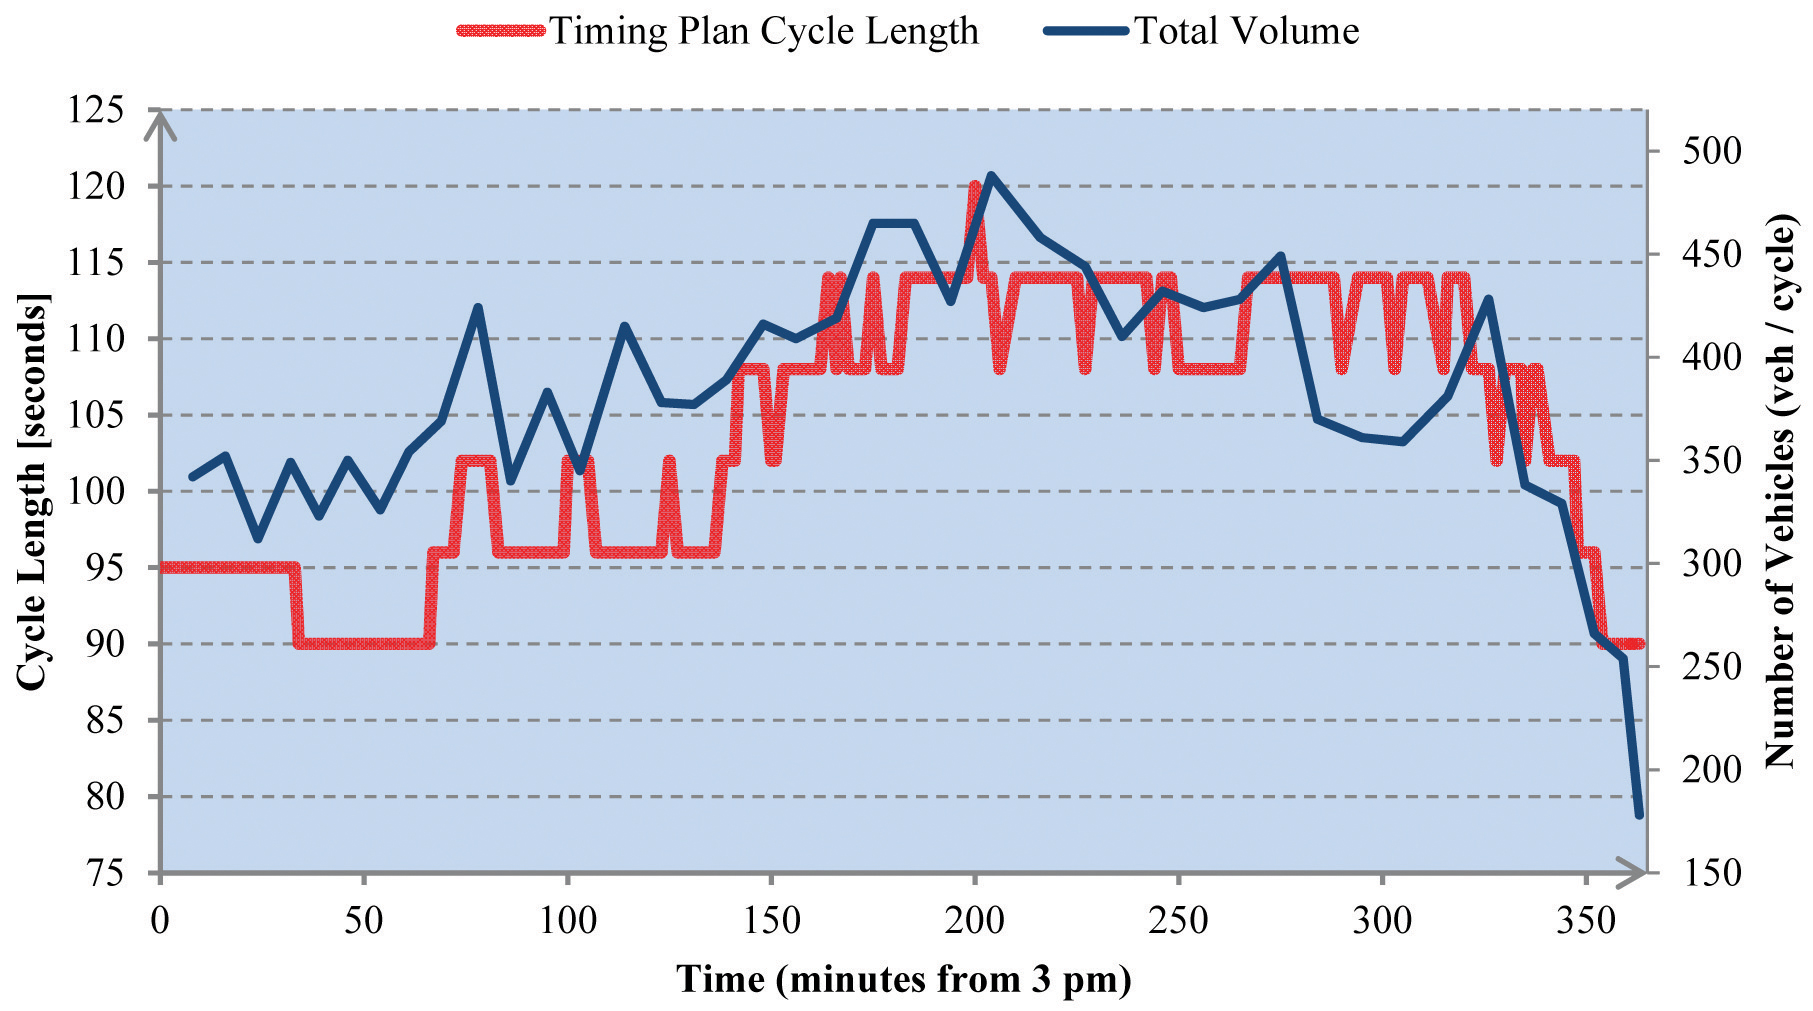 Figure 1: Total Volumes vs. Cycle Length at 72 Ave.